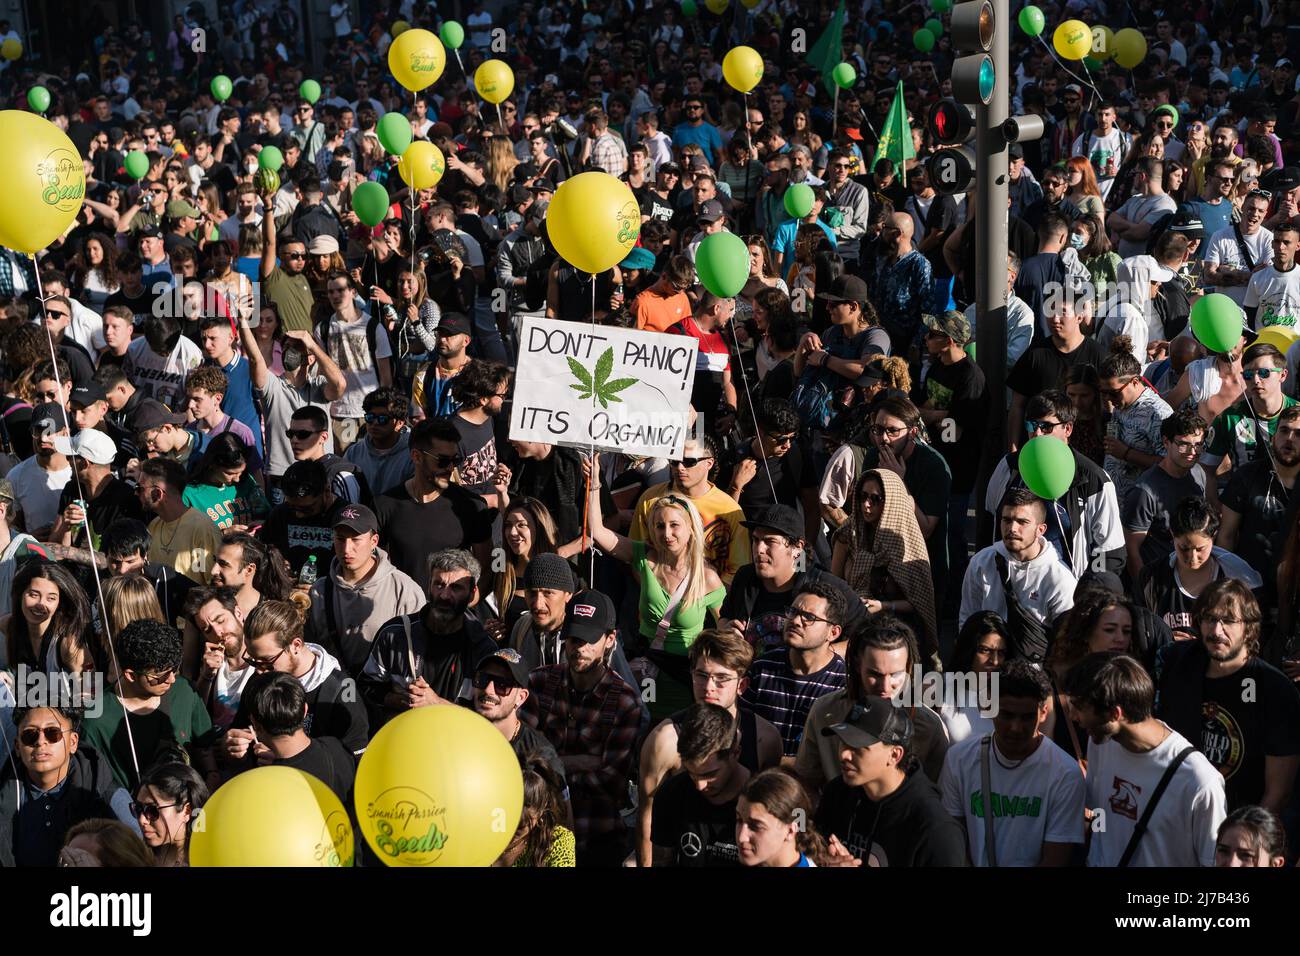 Hundreds of pro-cannabis protesters hold balloons during a demonstration in the center of Madrid. Thousands of pro-cannabis activists took part in a demonstration in La Gran Via in Madrid, Spain, in favor of legalizing the medicinal and recreational use of marijuana. (Photo by Diego Radames / SOPA Images/Sipa USA) Stock Photo